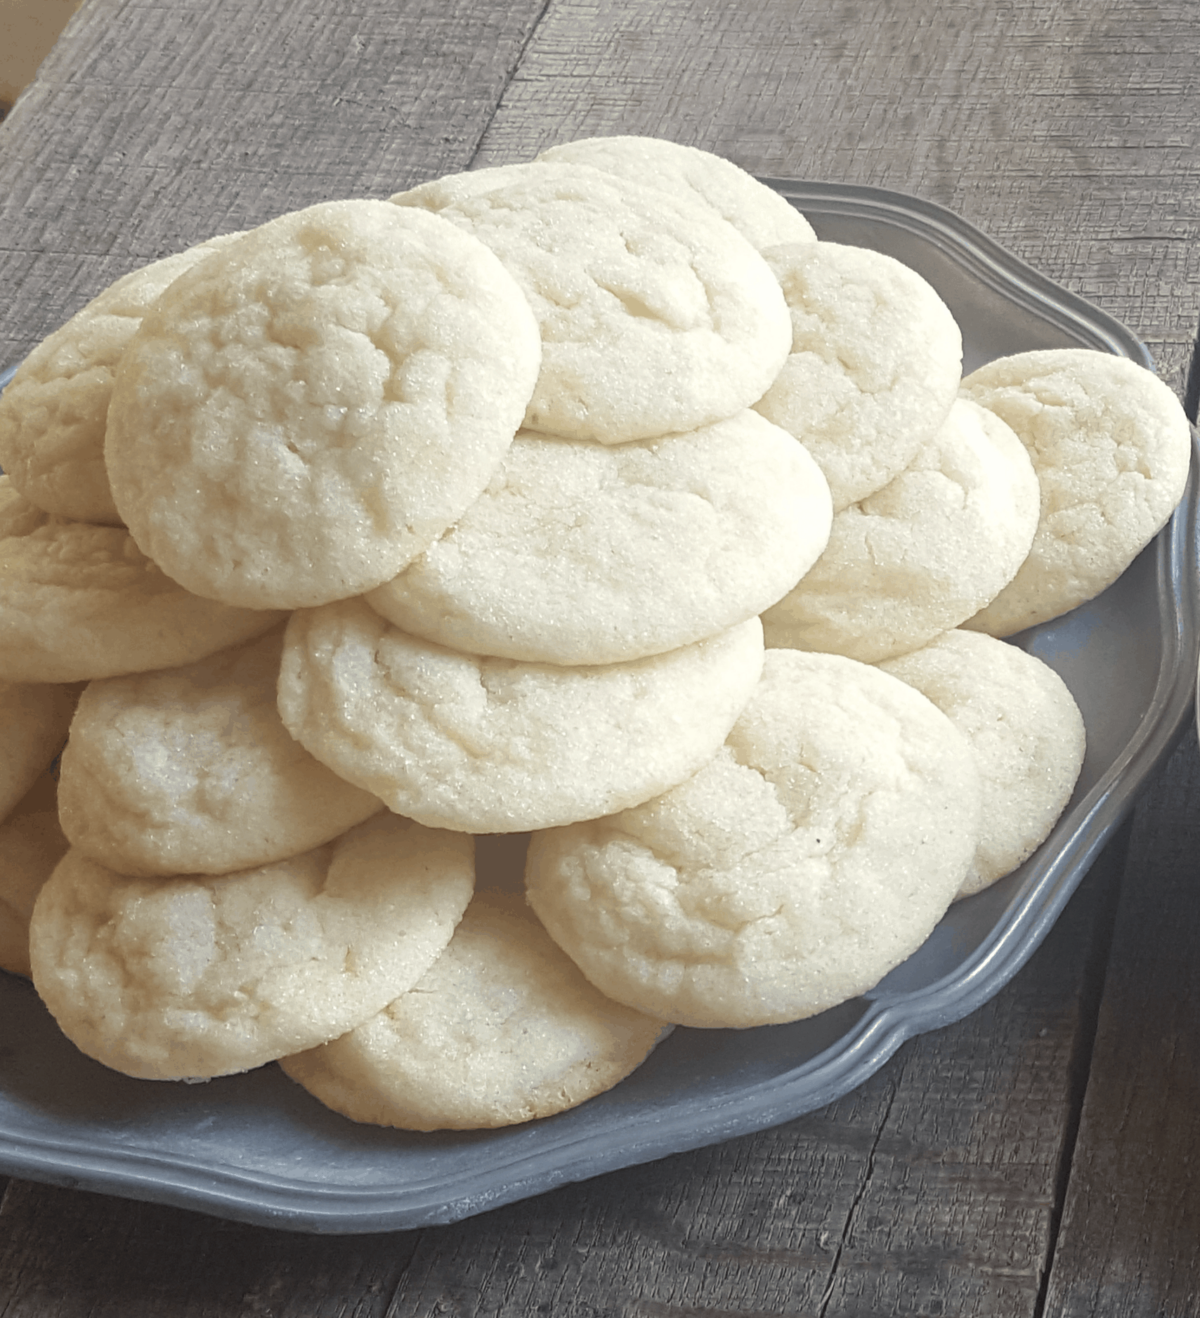 A plate full of Sugardoodles-A cross between a sugar cookie and a Snickerdoodle. 